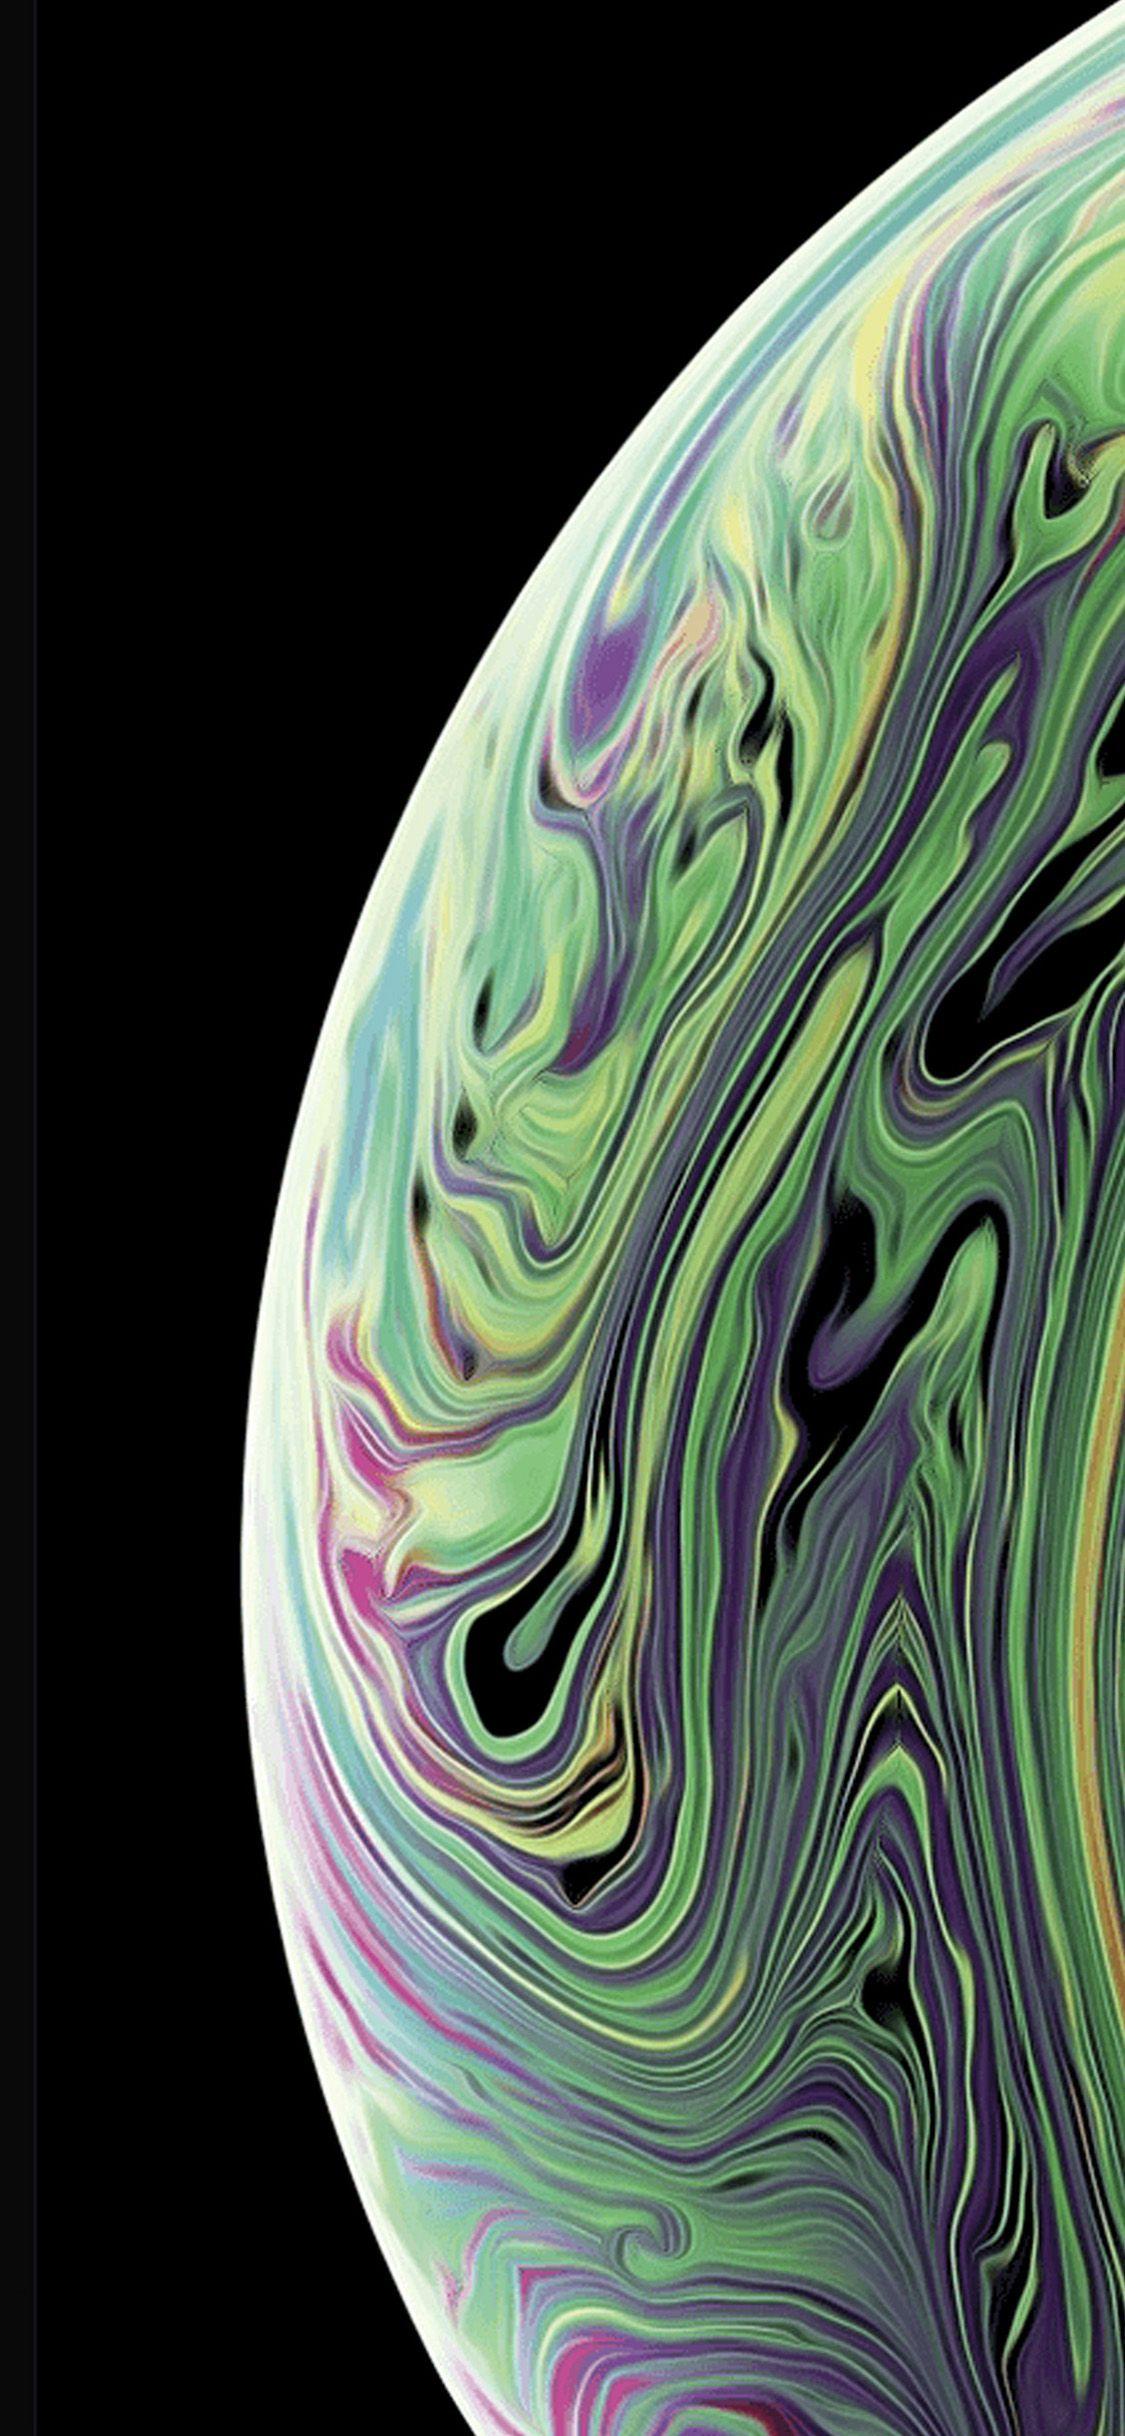 iPhone XS Max Wallpapers - Wallpaper Cave